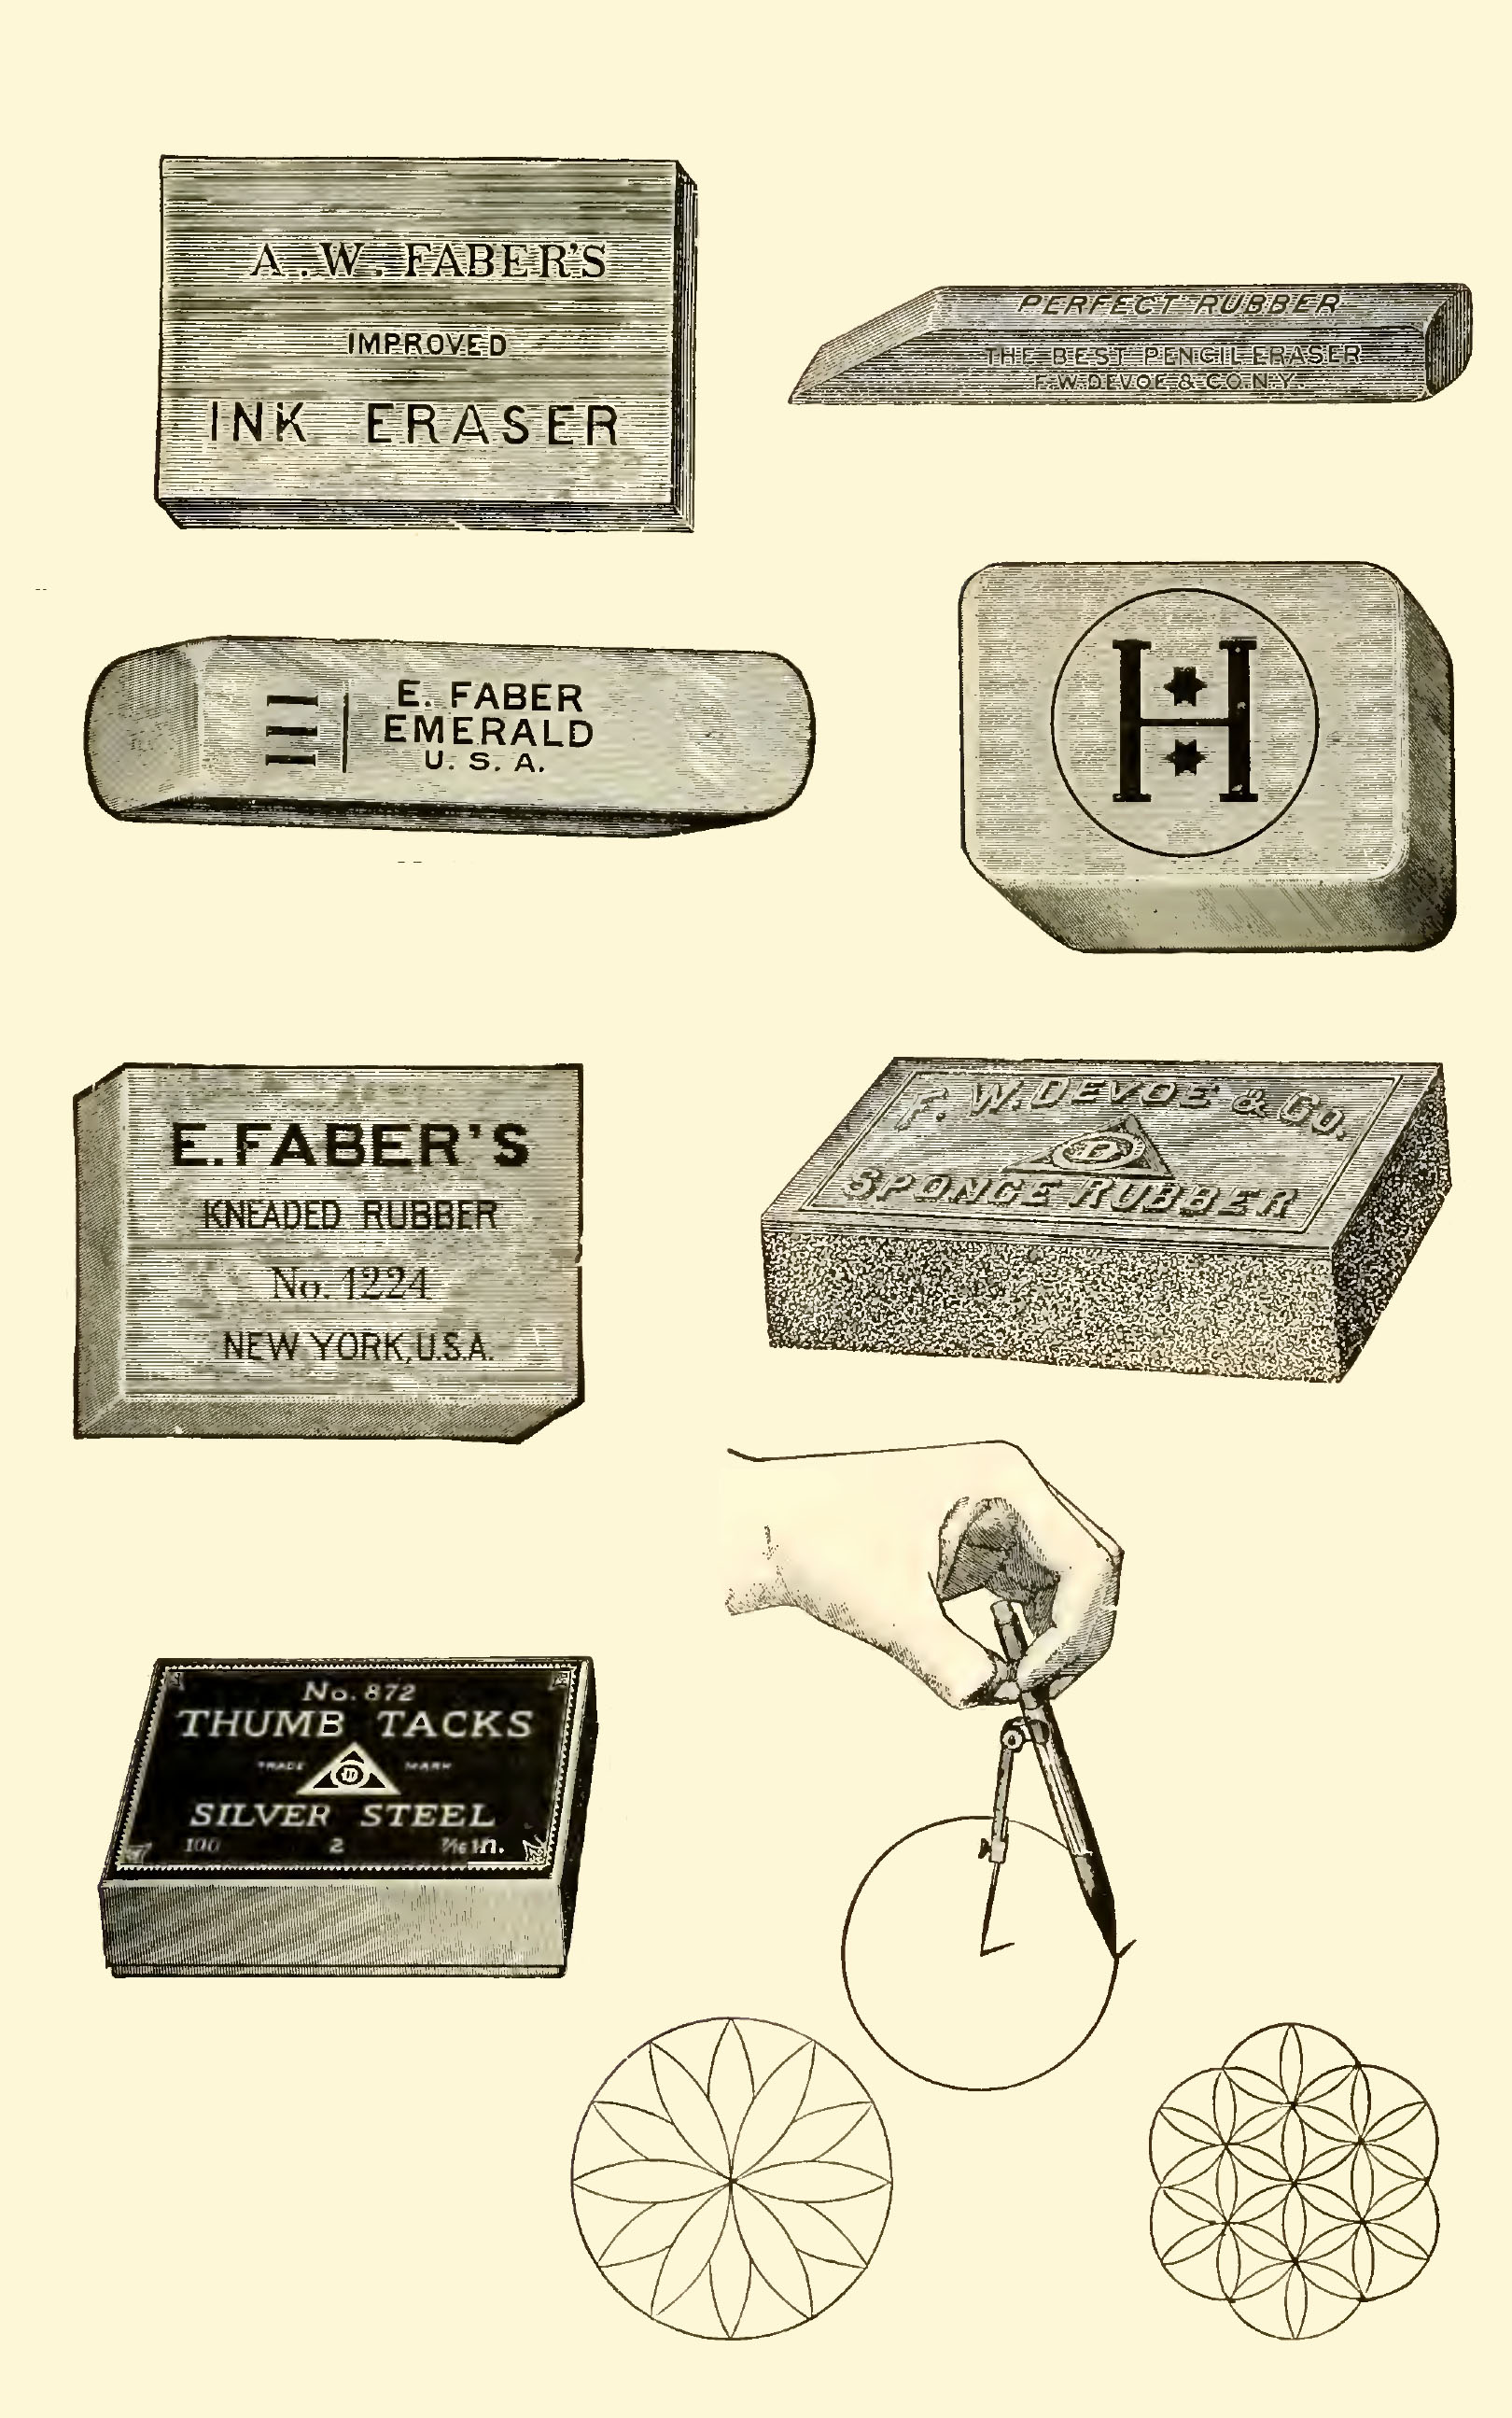 Different Types of Erasers